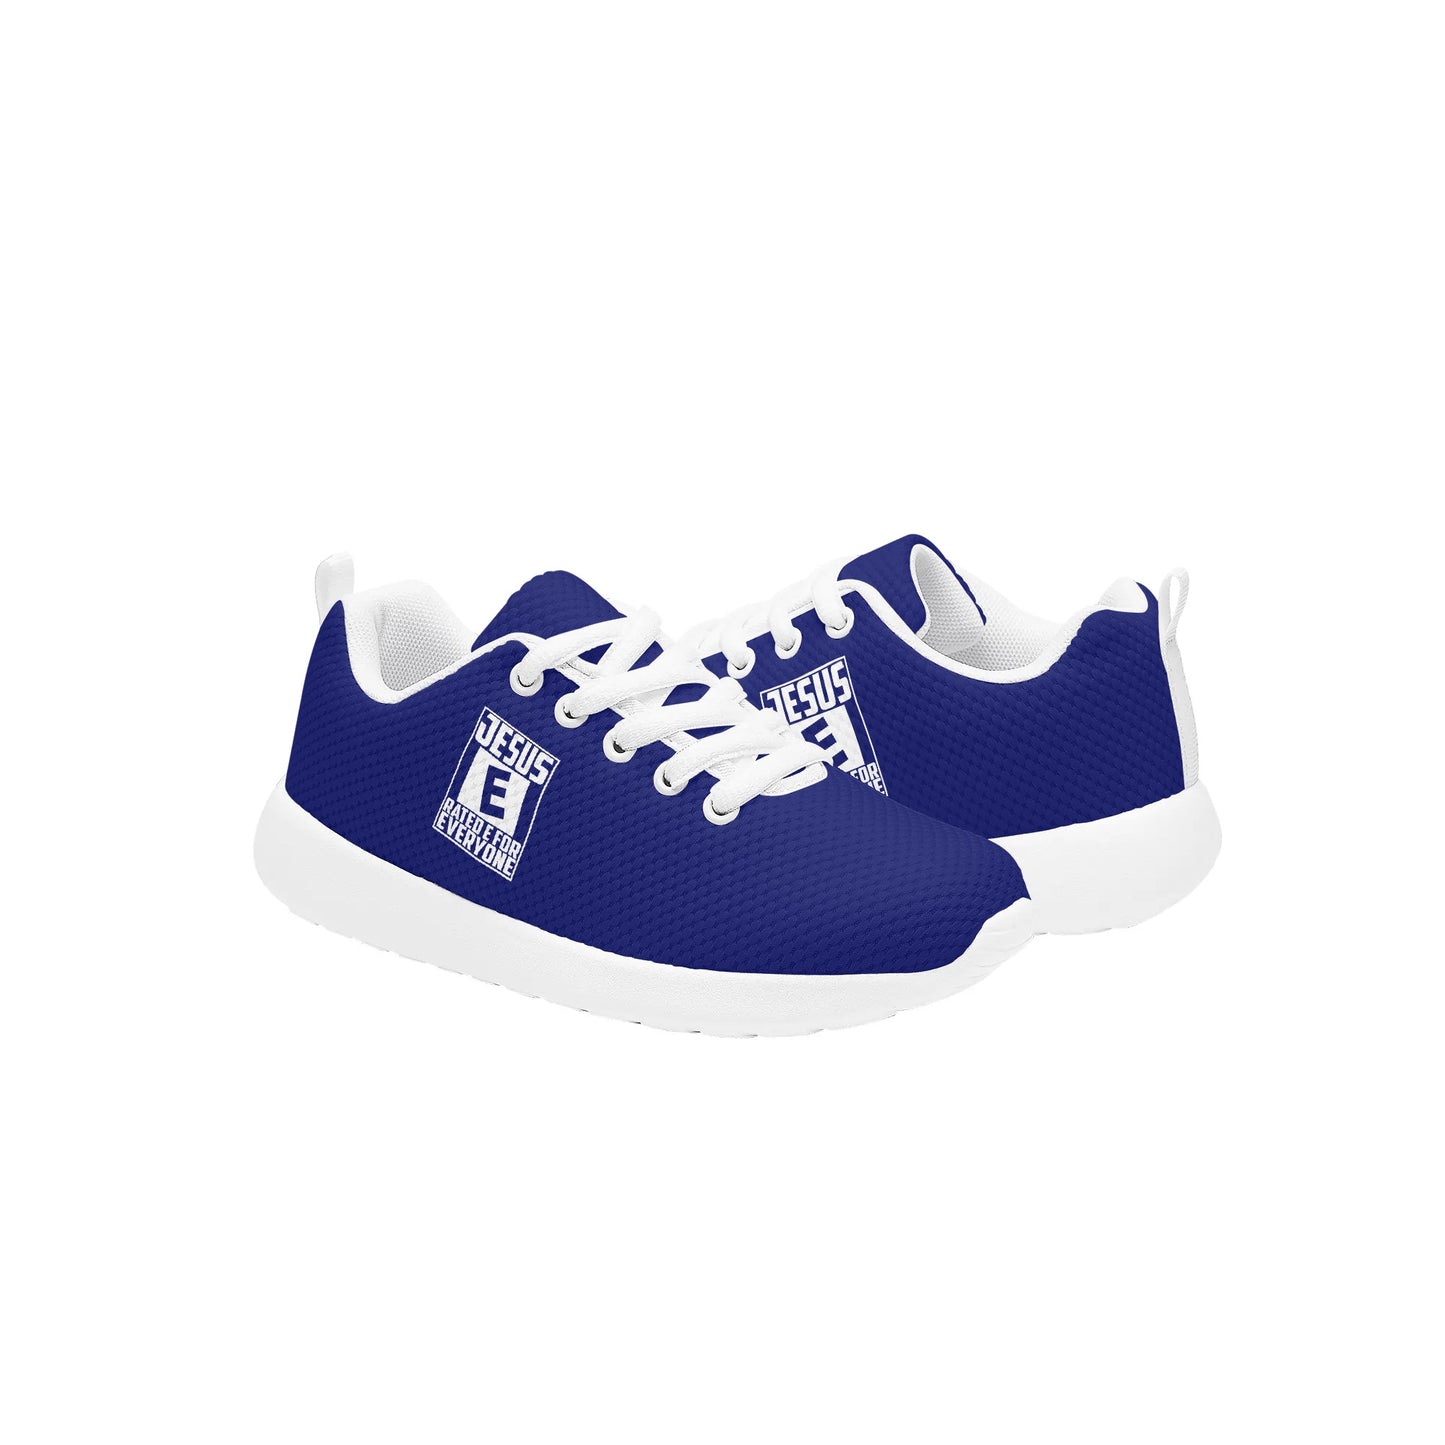 Jesus Rated E For Everyone Kids Lace-up Athletic Christian Sneakers popcustoms